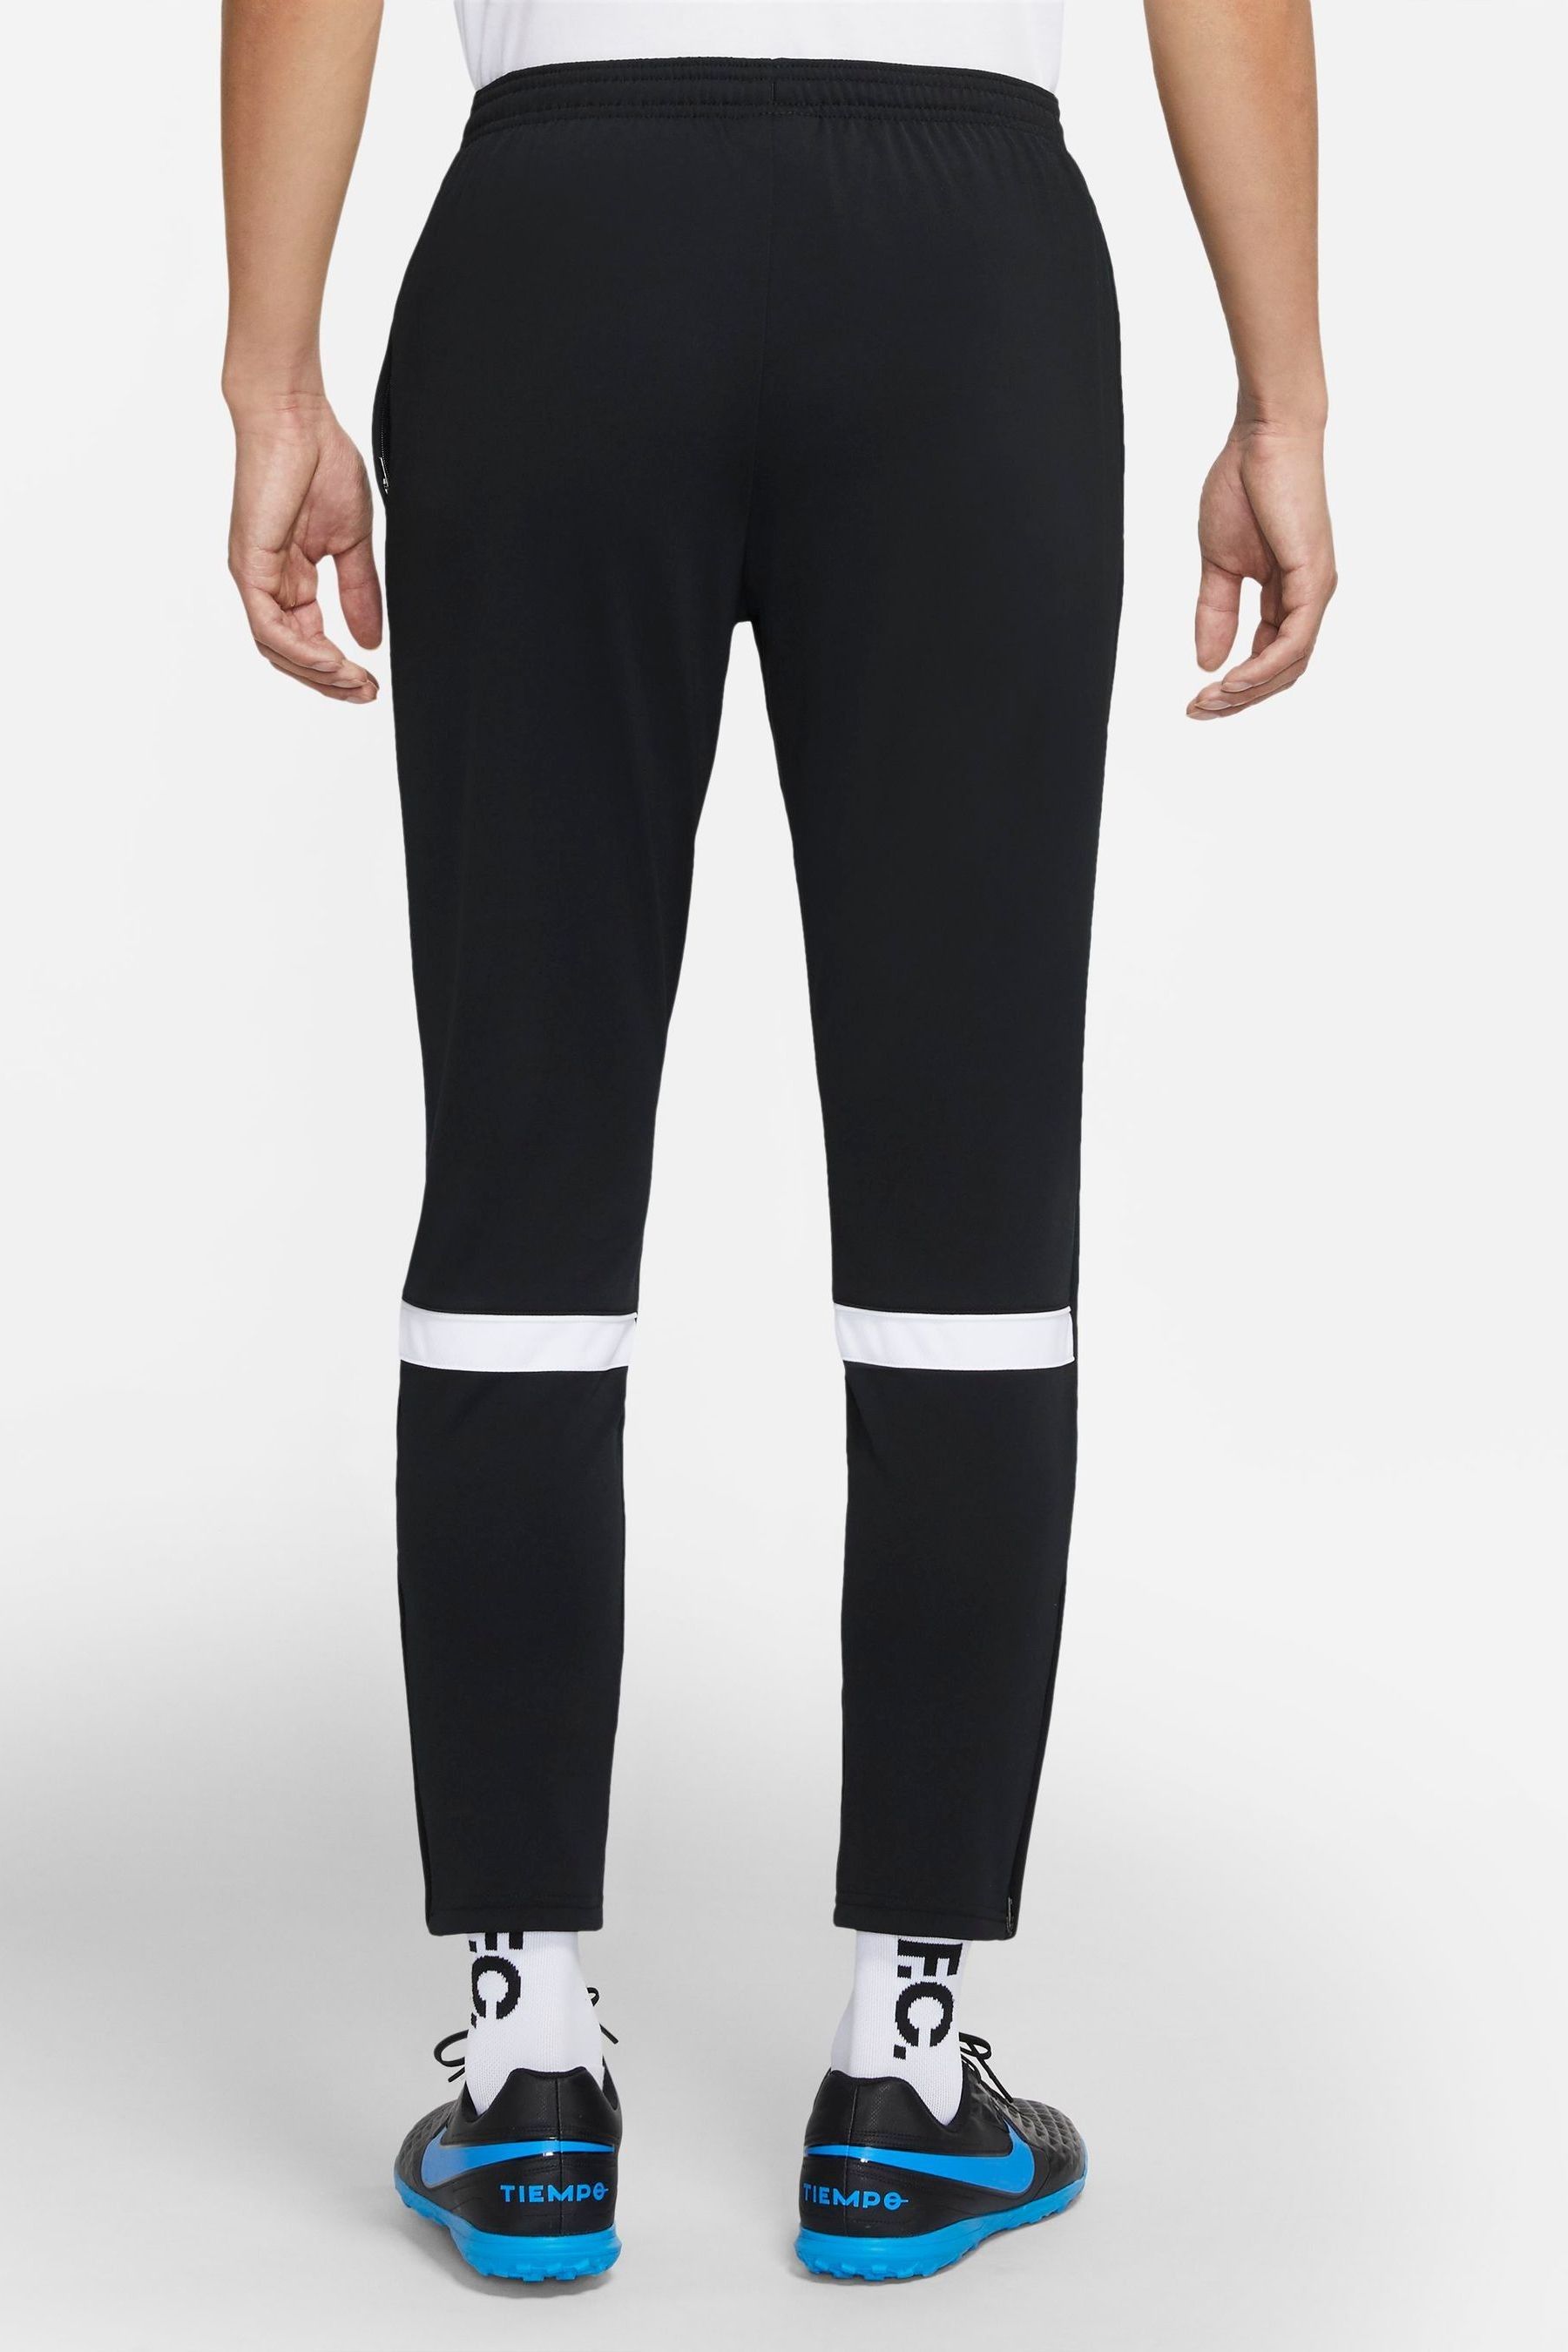 Buy Nike Black/White Dri-FIT Academy Joggers from the Next UK online shop